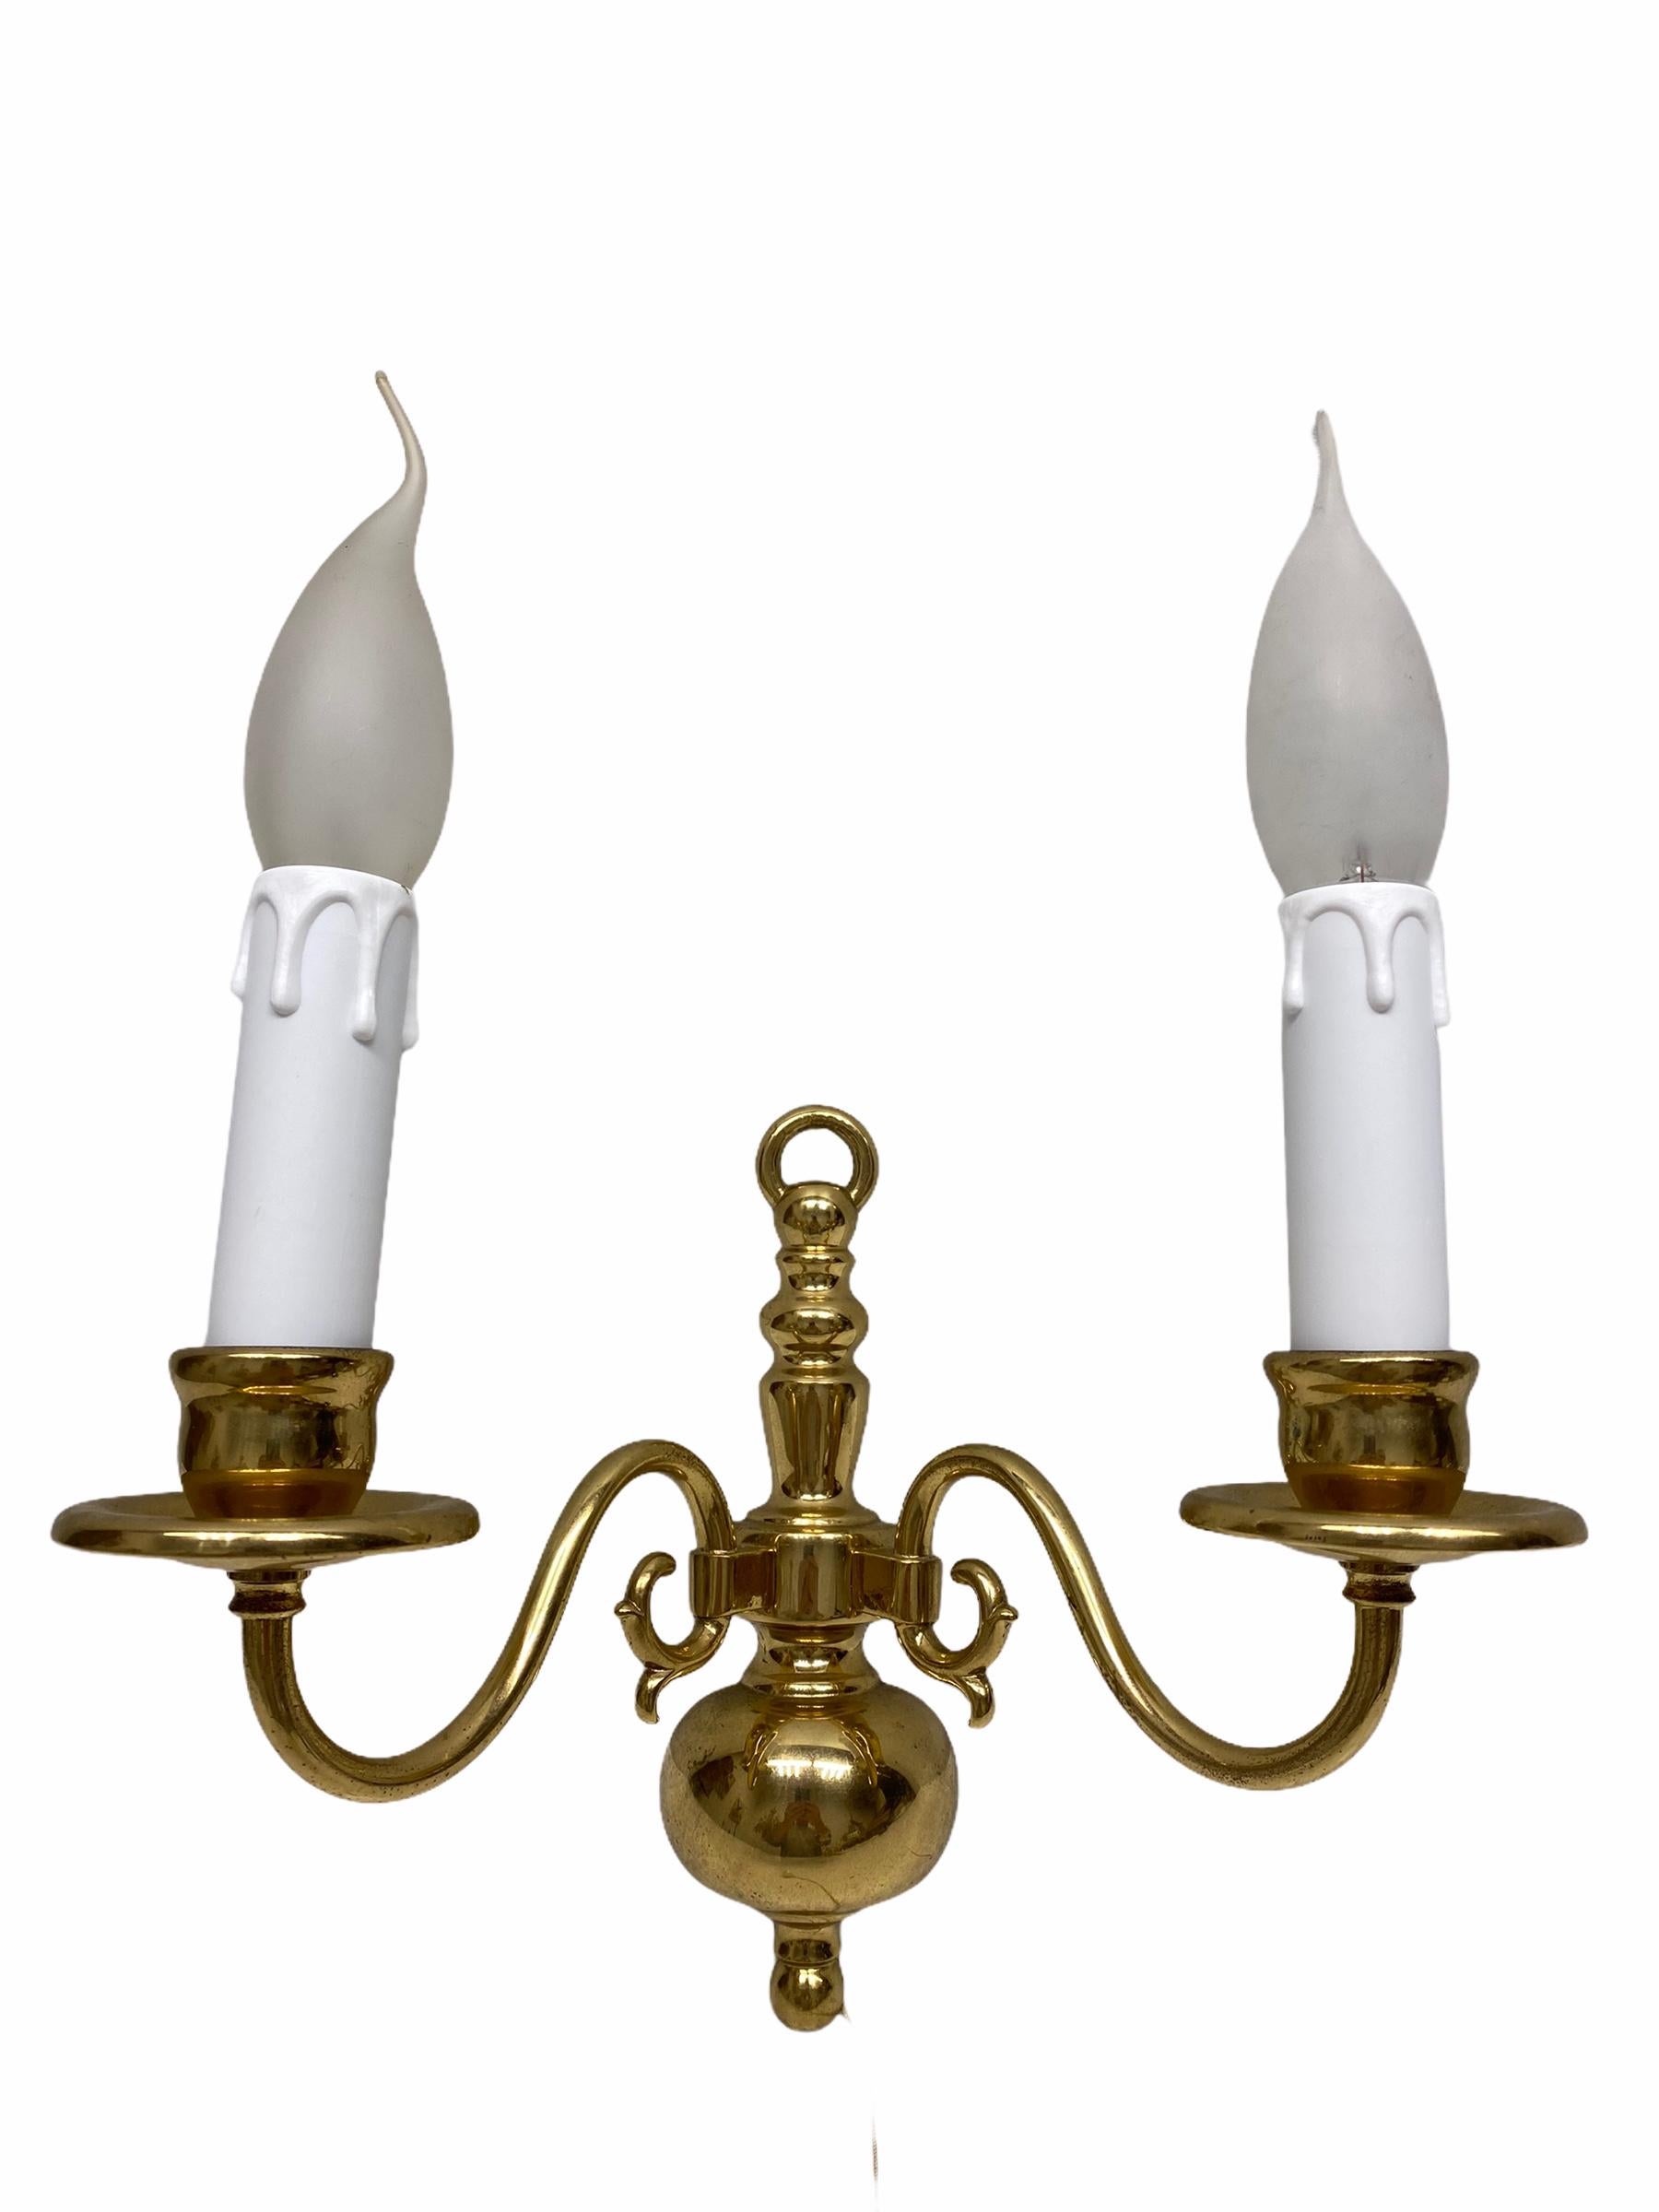 A stunning pair of heavy brass wall sconces. Each consisting of a stylish Farmhouse style design. Each fixture requires two European E14 / 110 Volt candelabra bulbs, each bulb up to 40 watts. Light bulbs shown on the pictures are not included in the